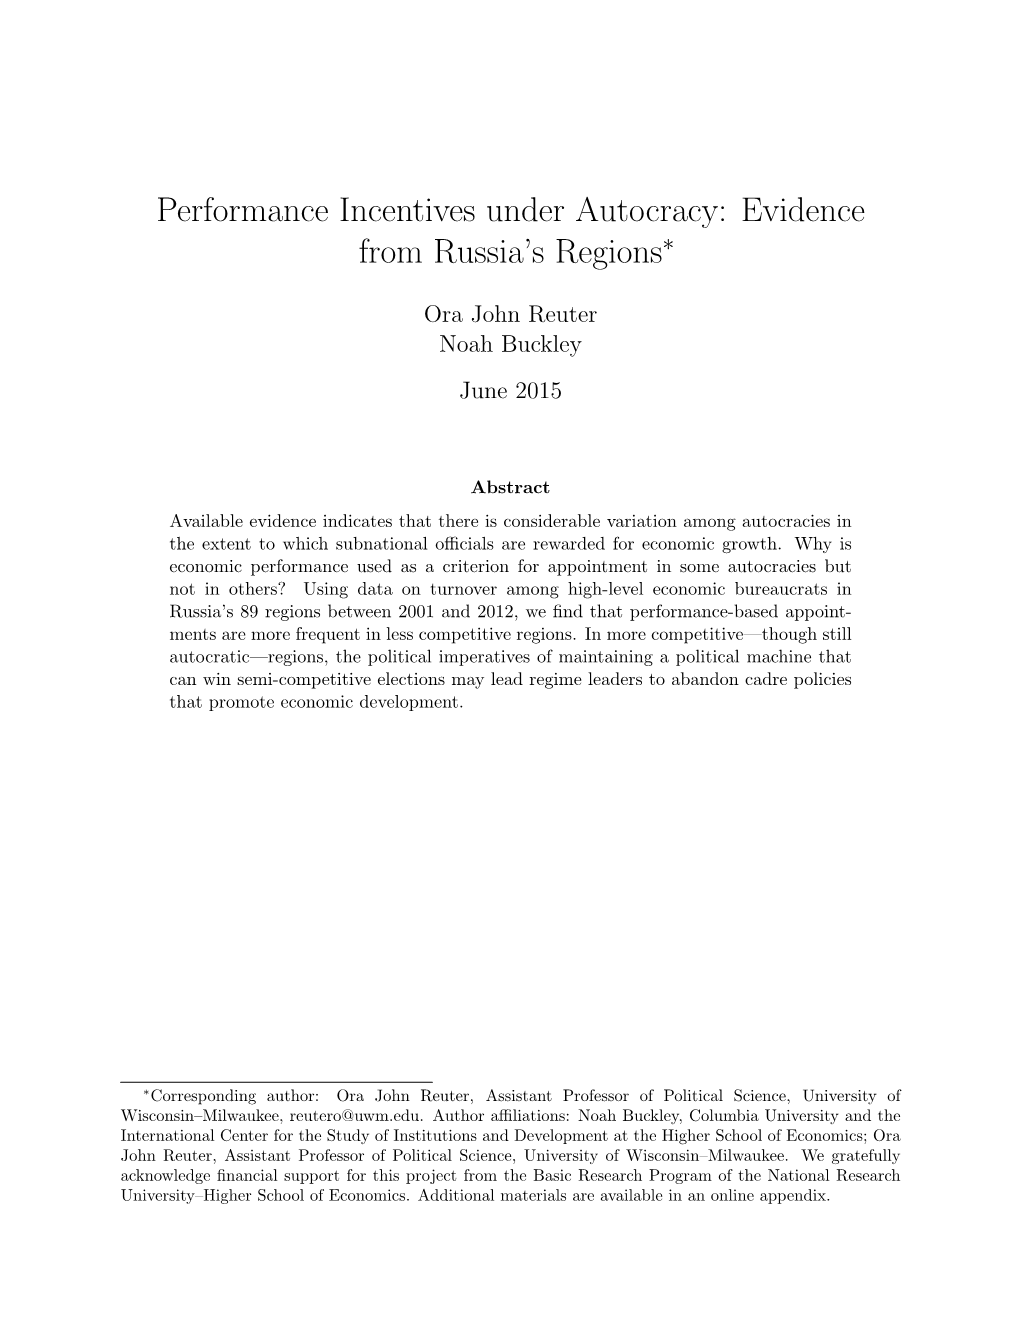 Performance Incentives Under Autocracy: Evidence from Russia's